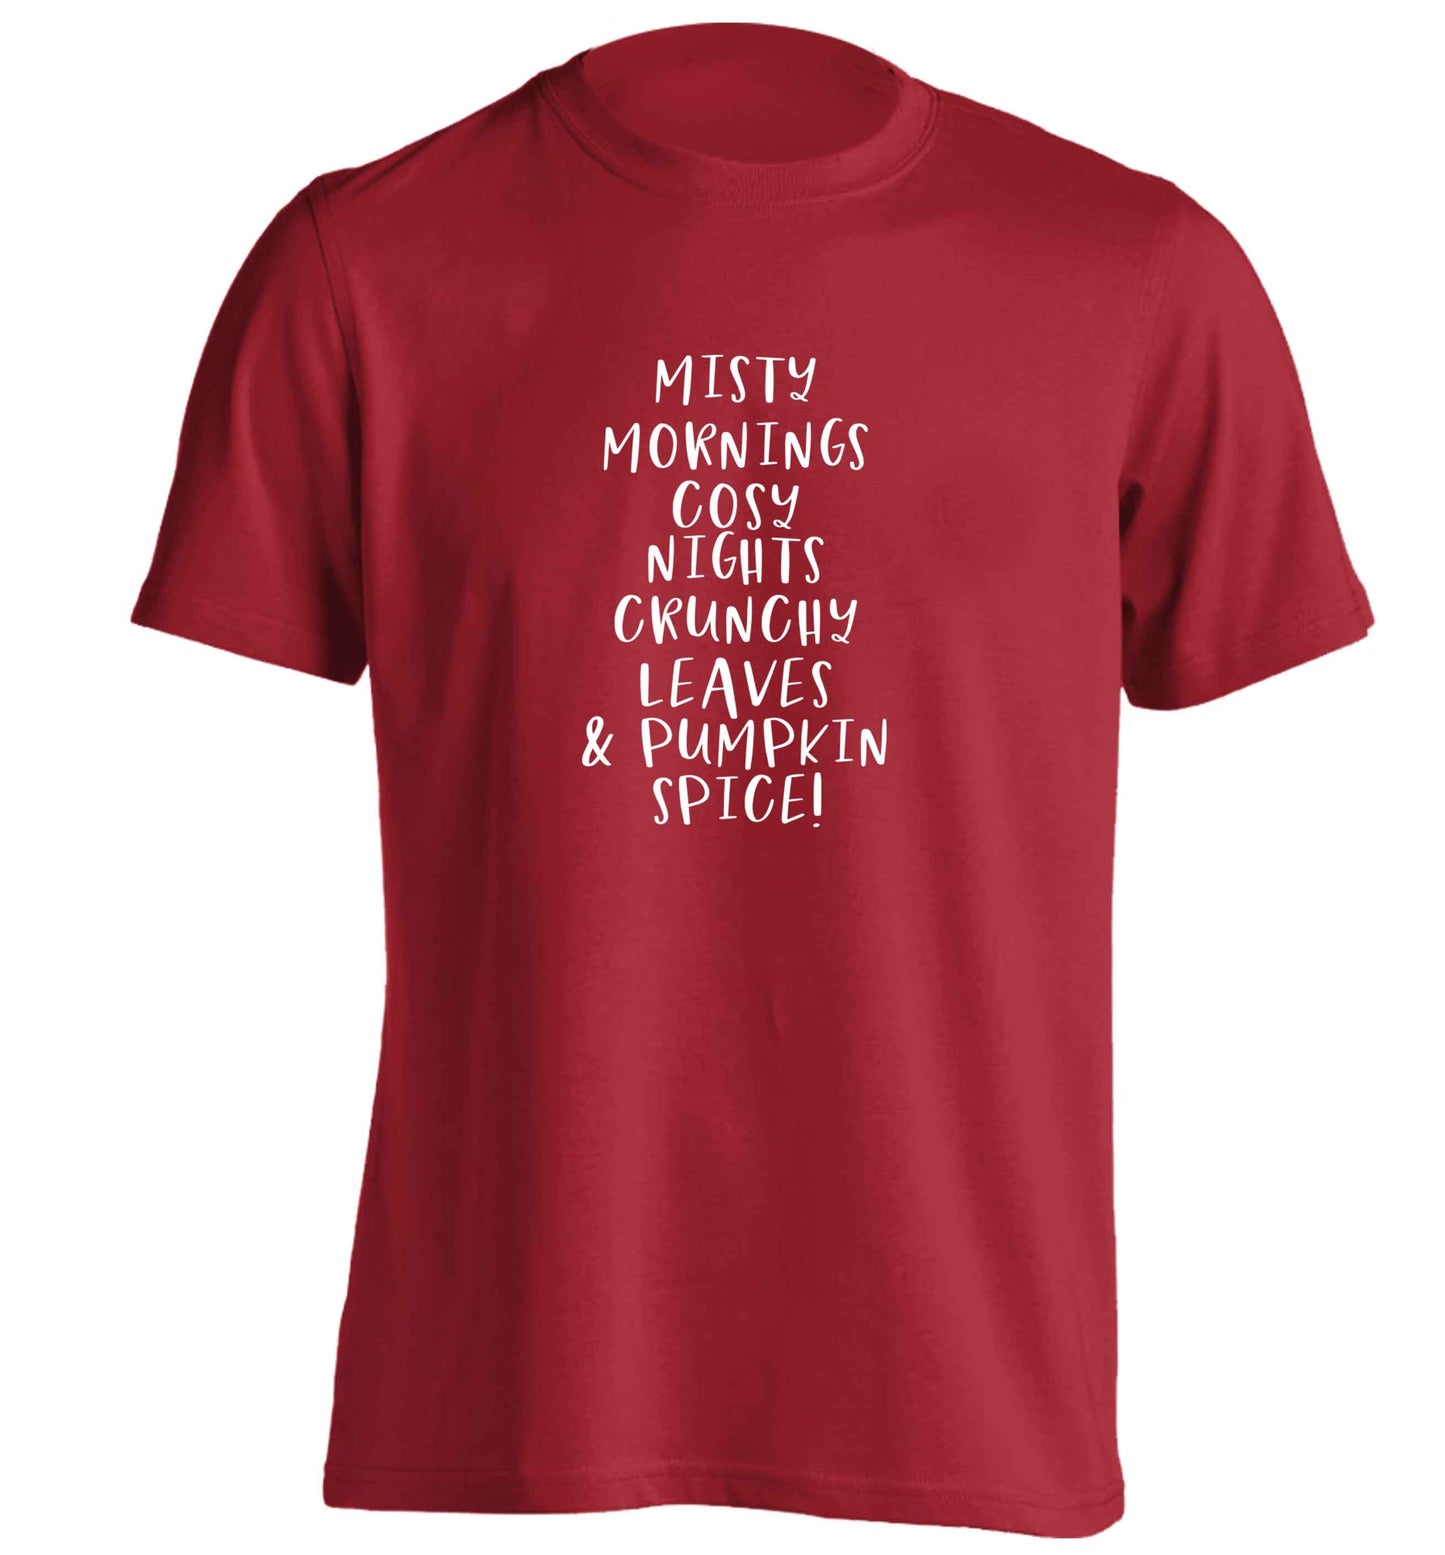 Misty Mornings adults unisex red Tshirt 2XL